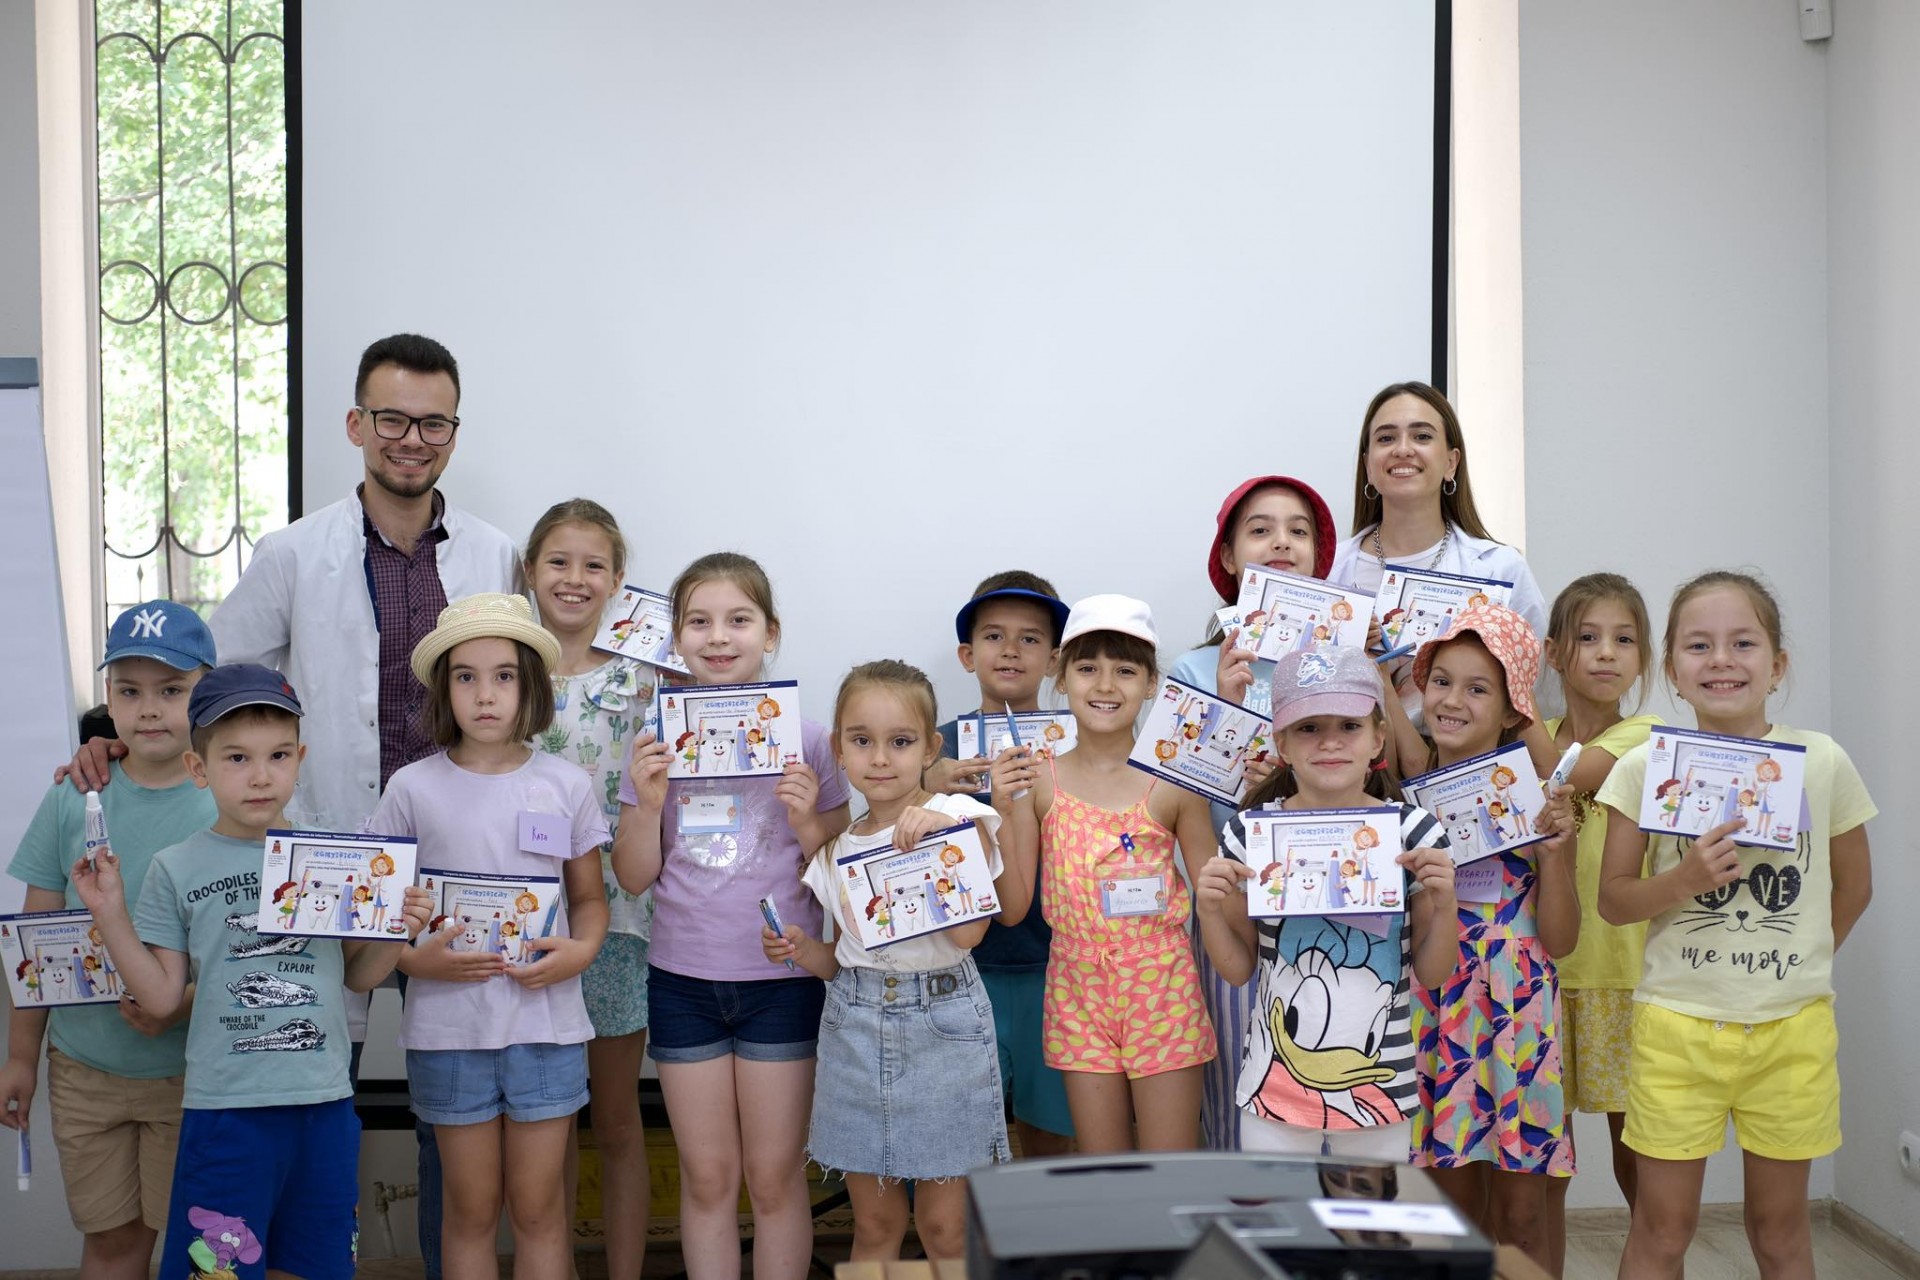 Children from the Community Center ”Laolaltă” attended a free lesson on dental health